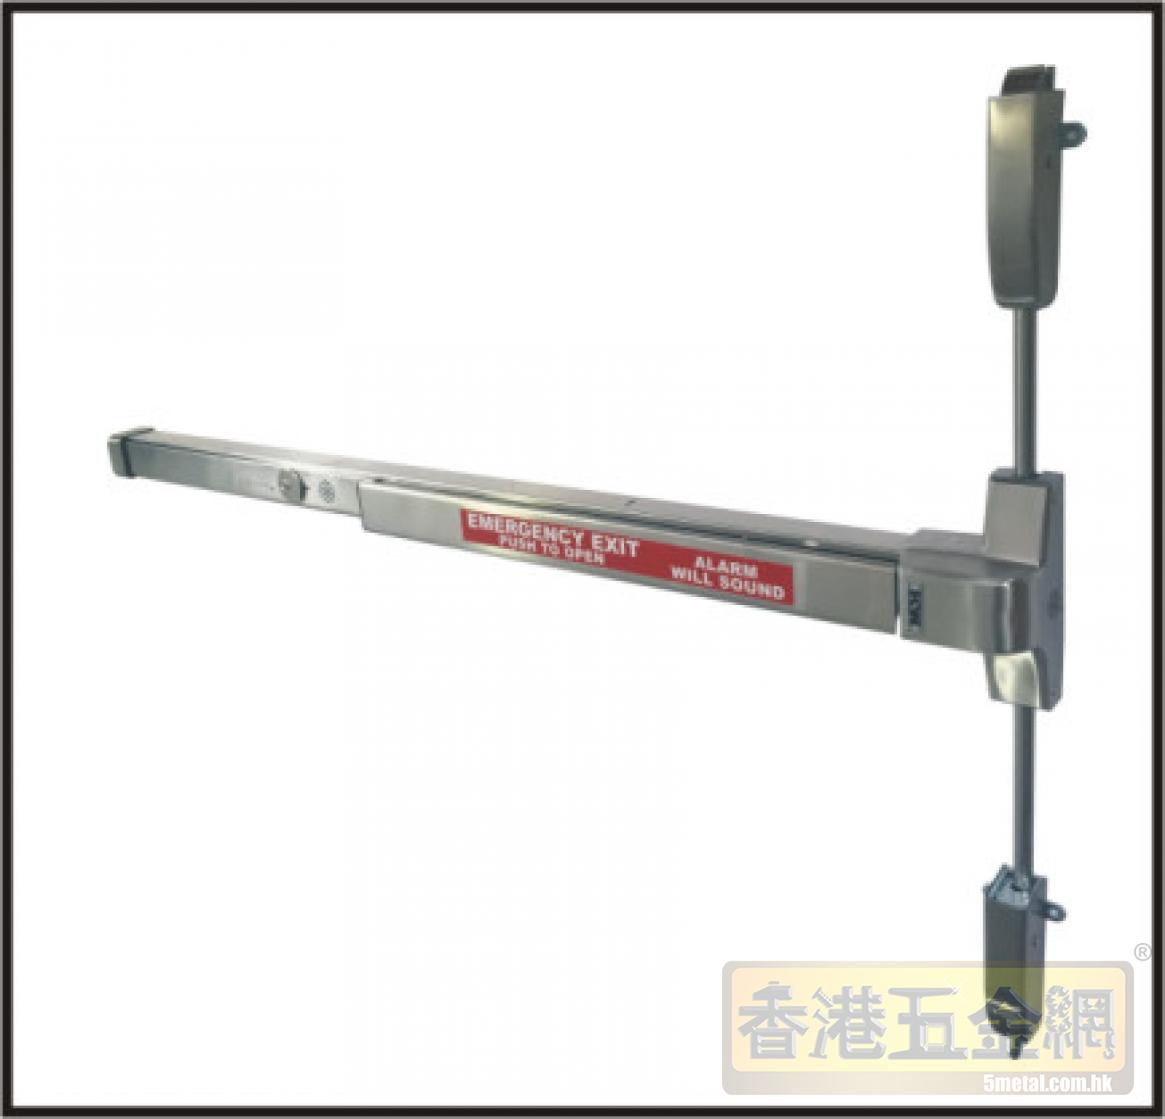 Panic Exit Device (Vertical Rod Function With Alarm) - KW 500SS-02-A 消防警鐘門鎖 緊急出口裝置